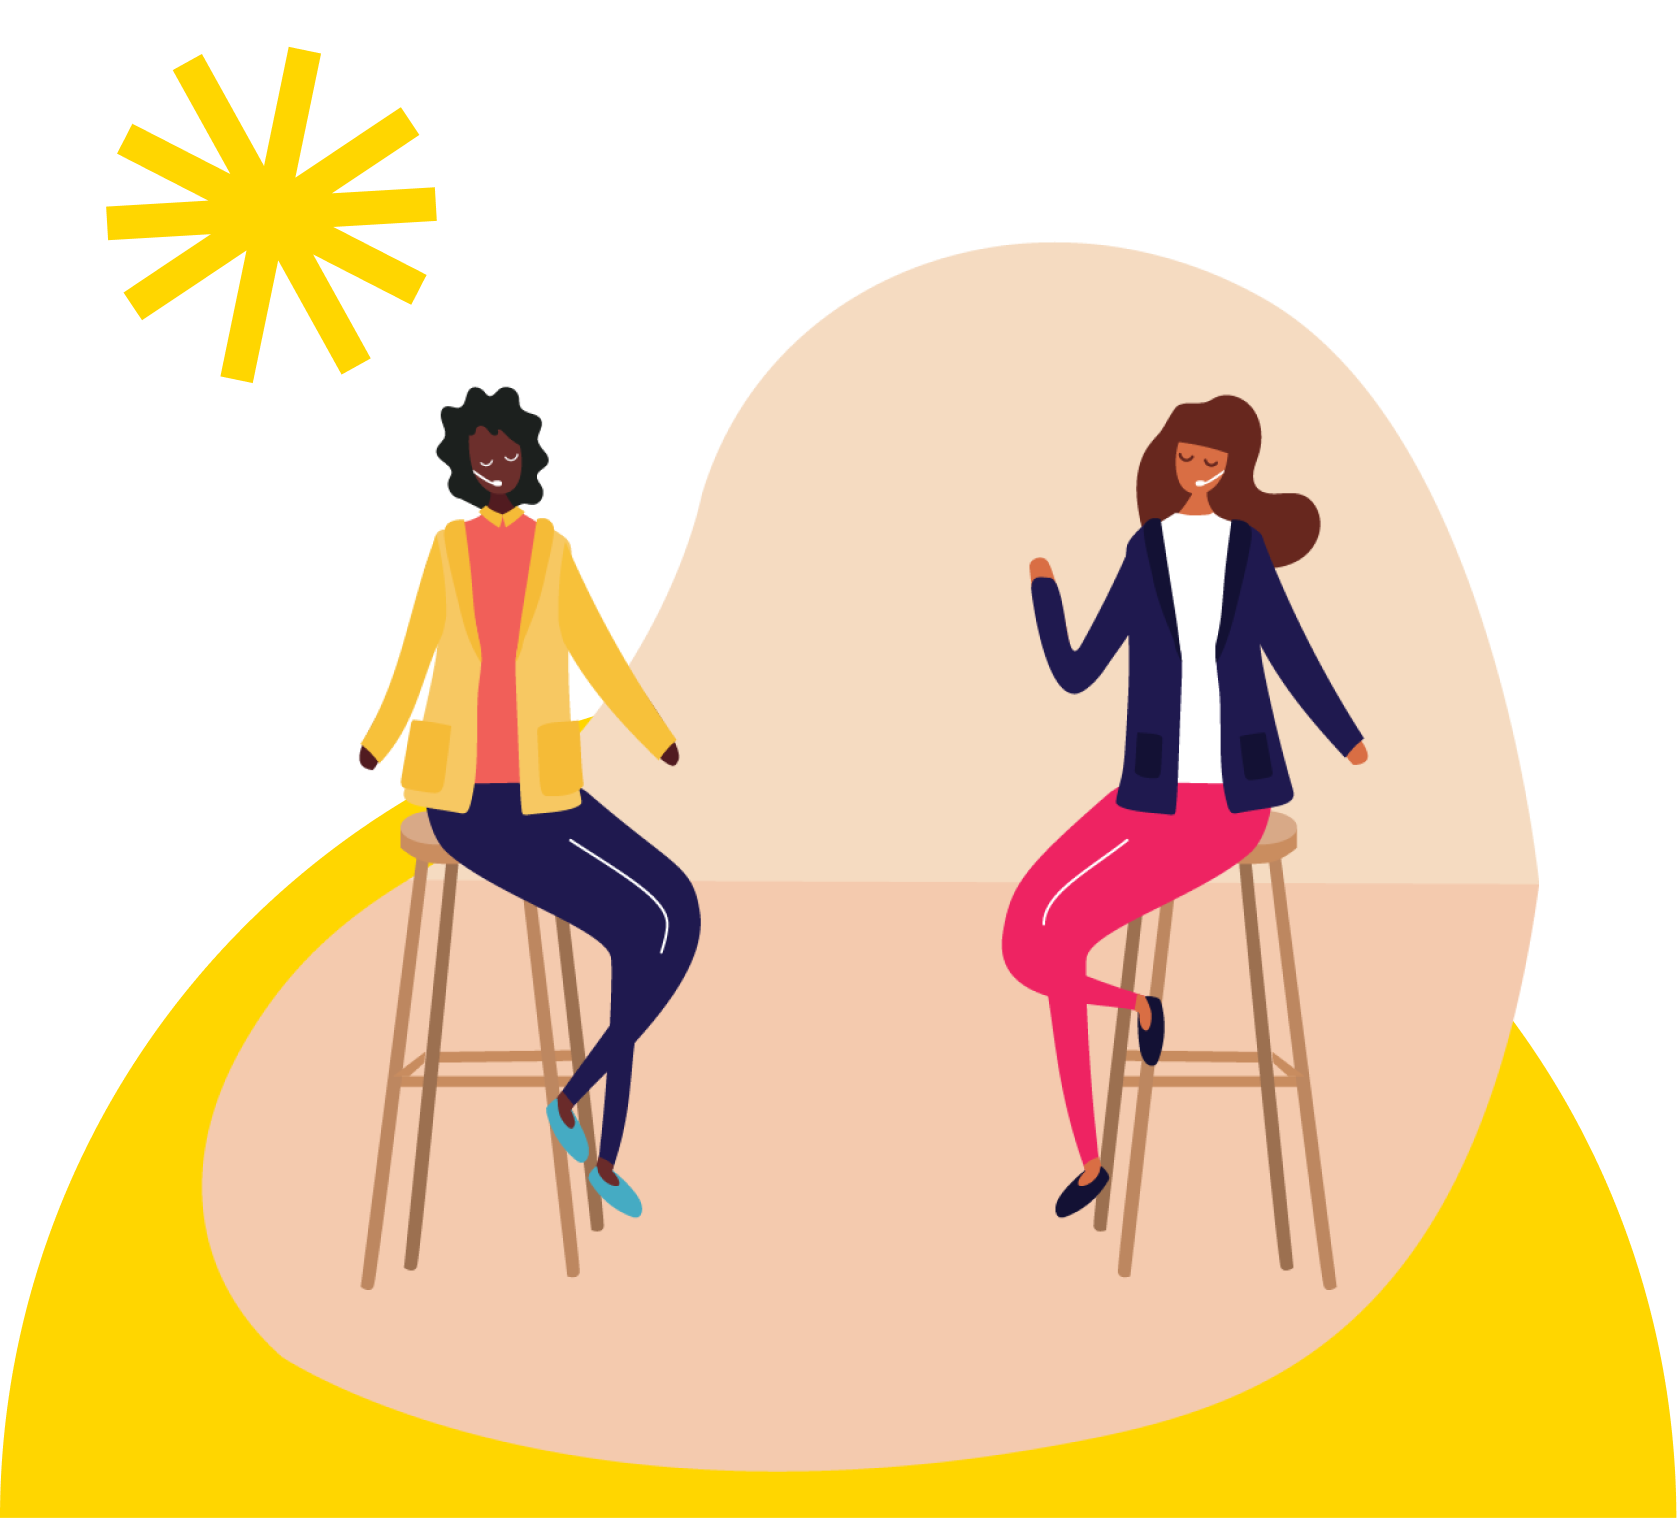 Illustration of two women sitting on a stool and talking to each other with yellow graphics in the background.